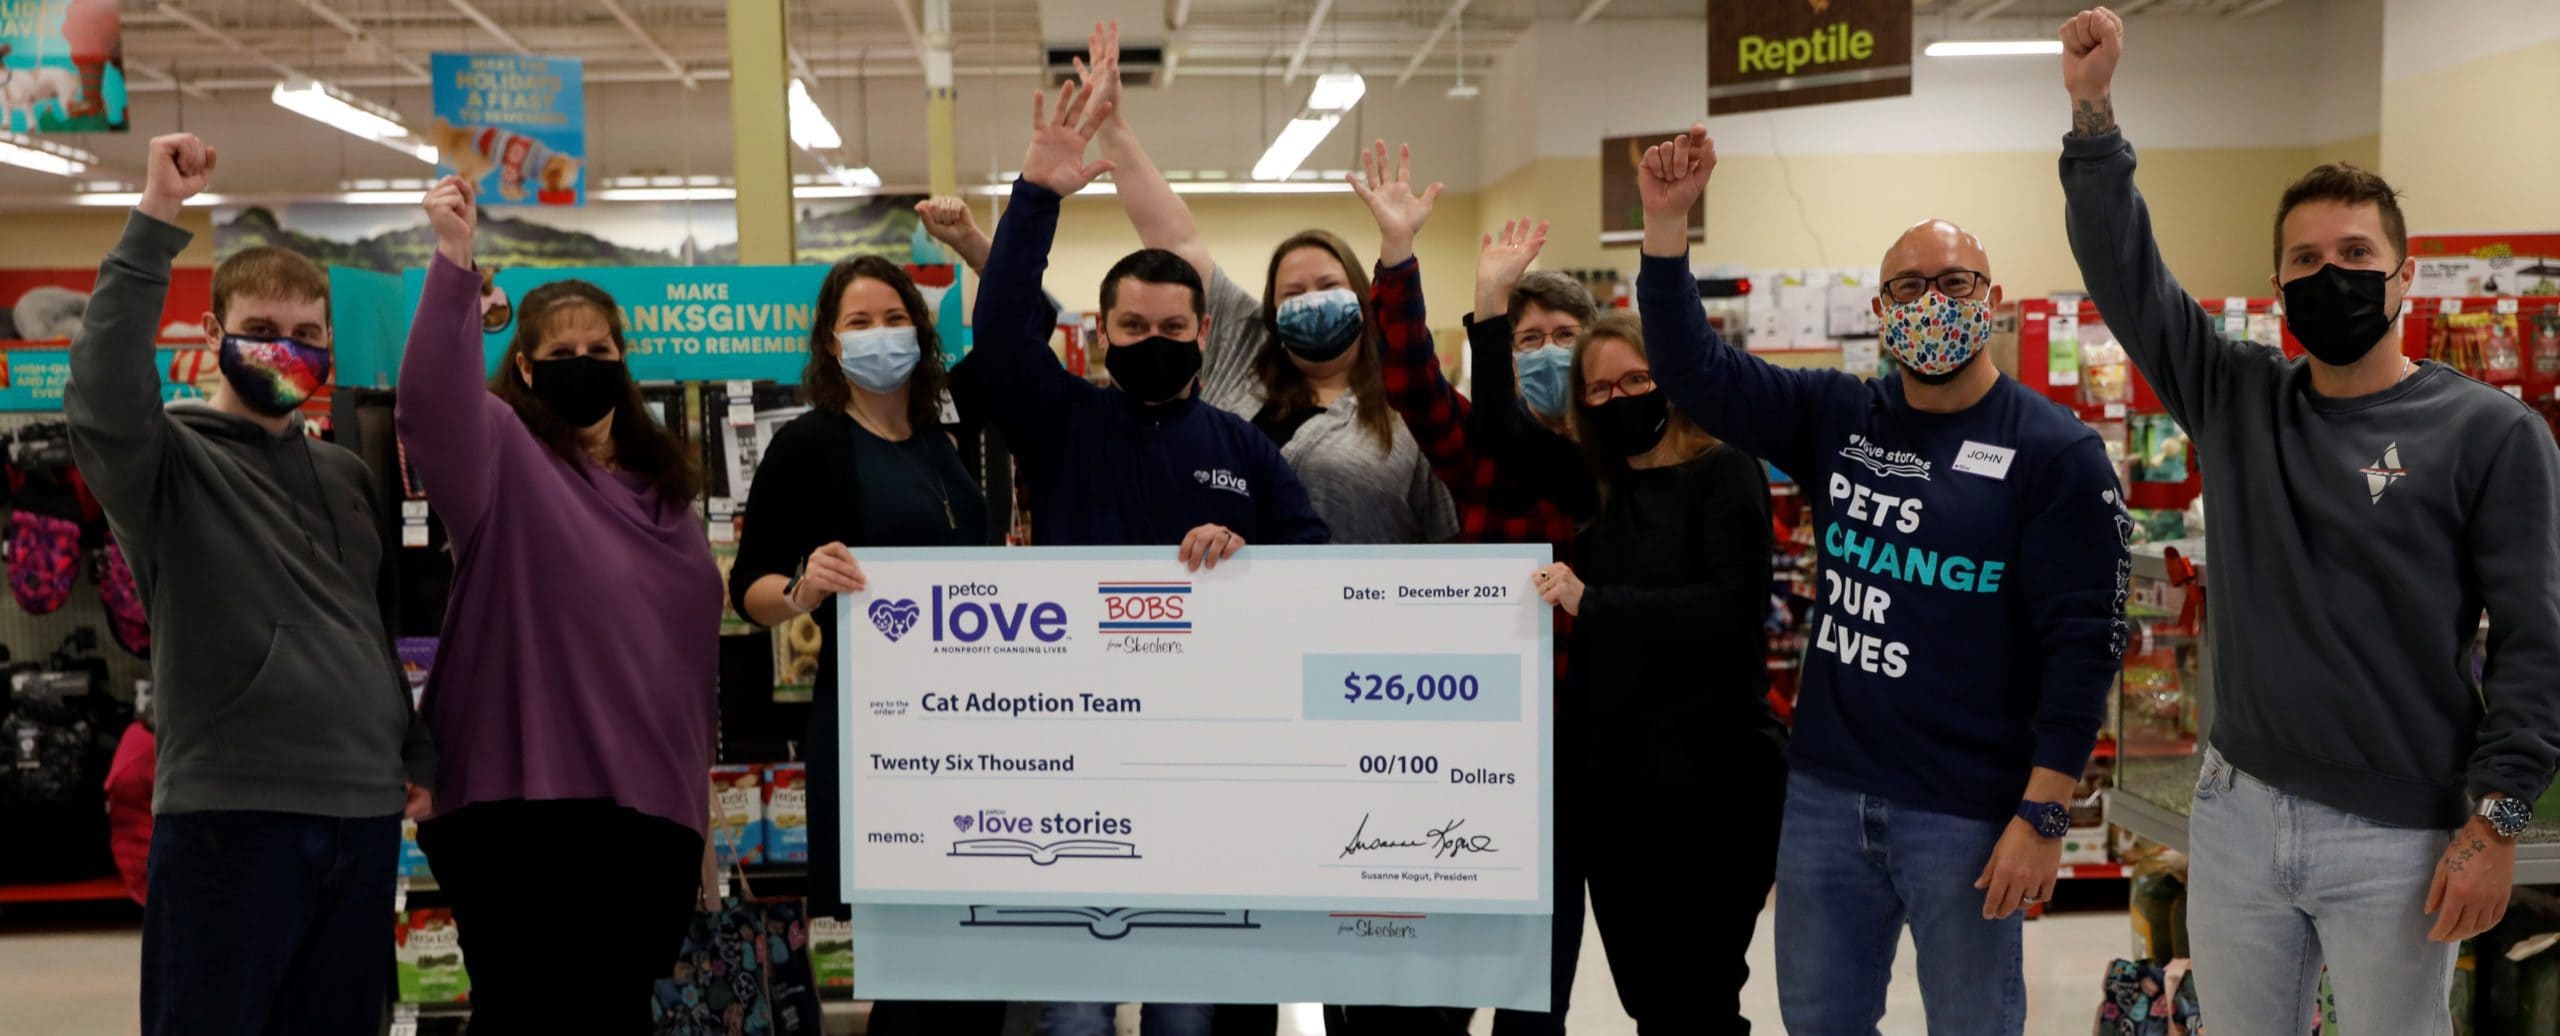 A group of people raise their hands in celebration behind a large check from Petco Love